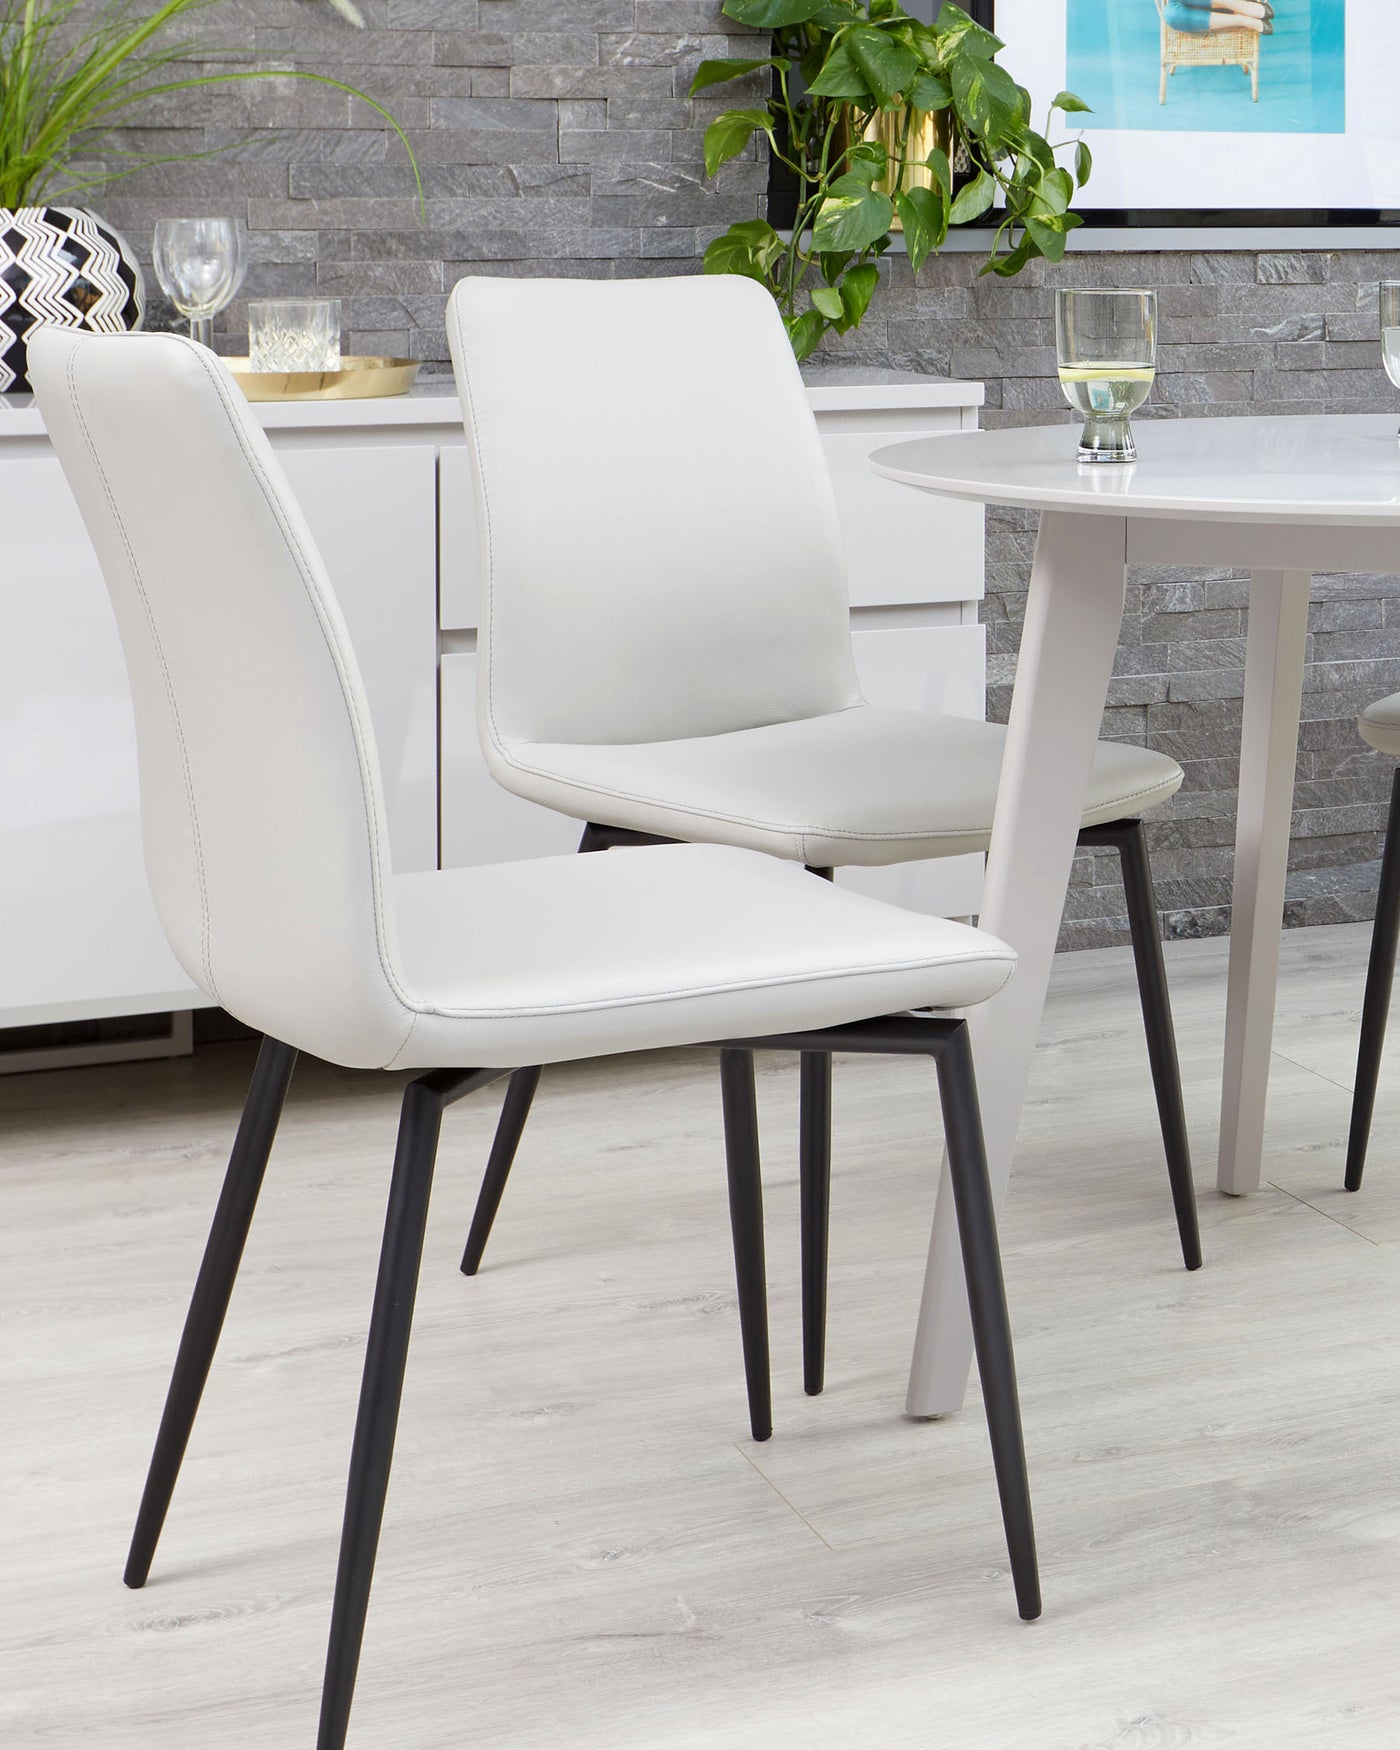 Modern minimalist furniture set including a white round dining table and sleek chairs with white upholstery and black metal legs, arranged on a light wood floor against a backdrop of a grey stone wall with decorative items and greenery.